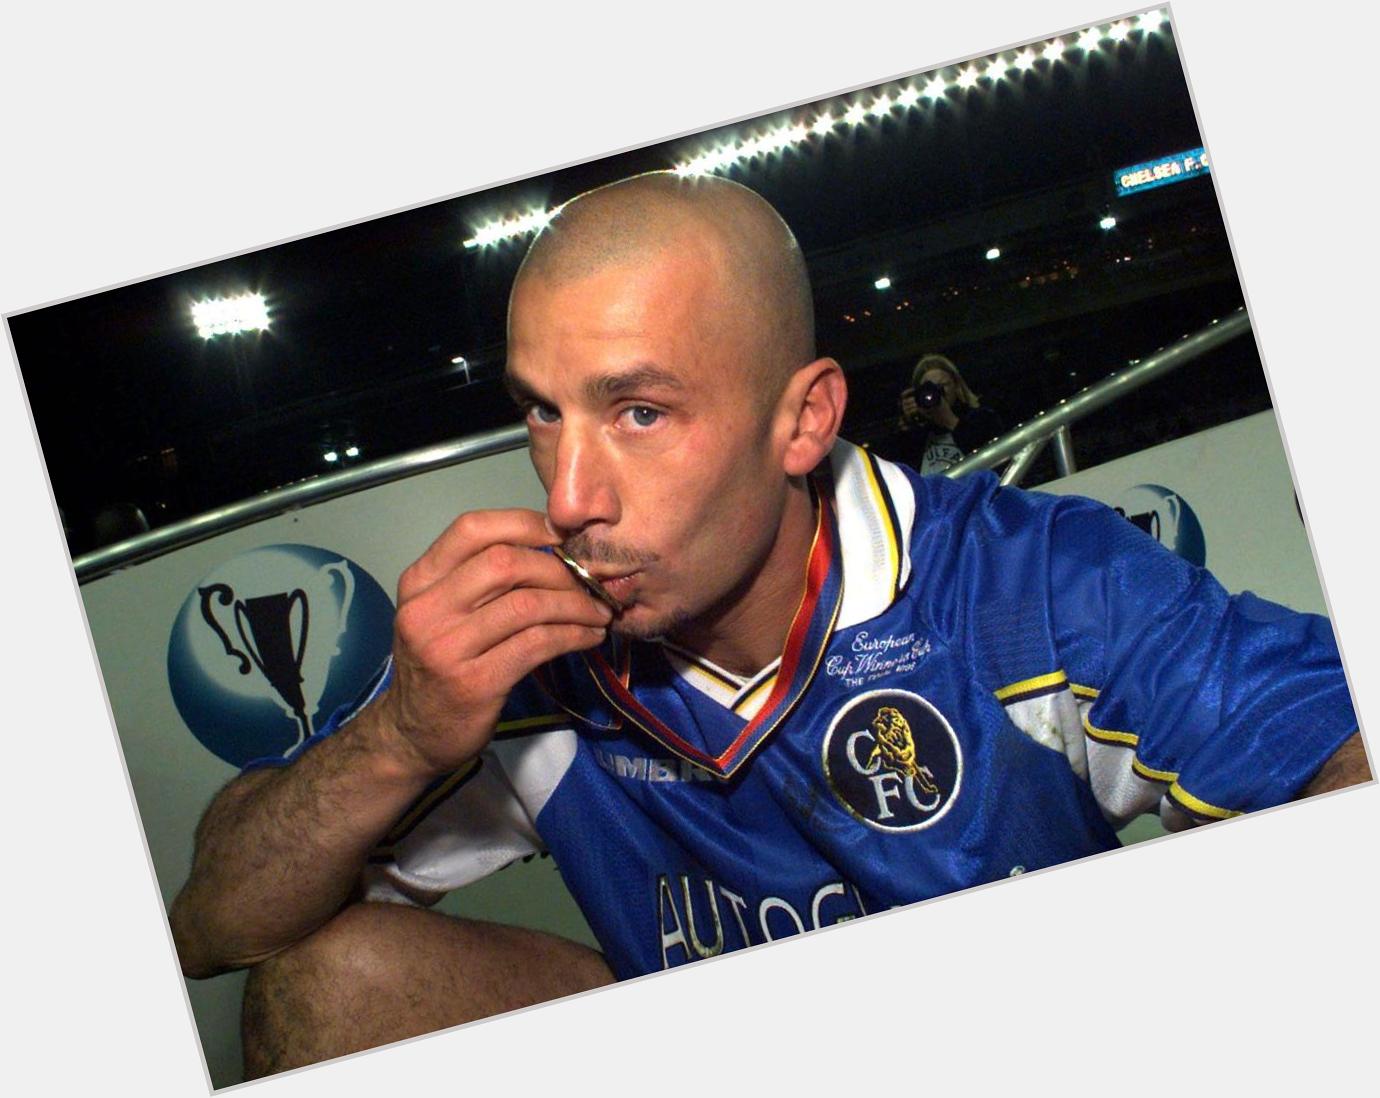 Happy heavenly birthday to Gianluca Vialli. 

Missed everyday by so many, what a legend.    